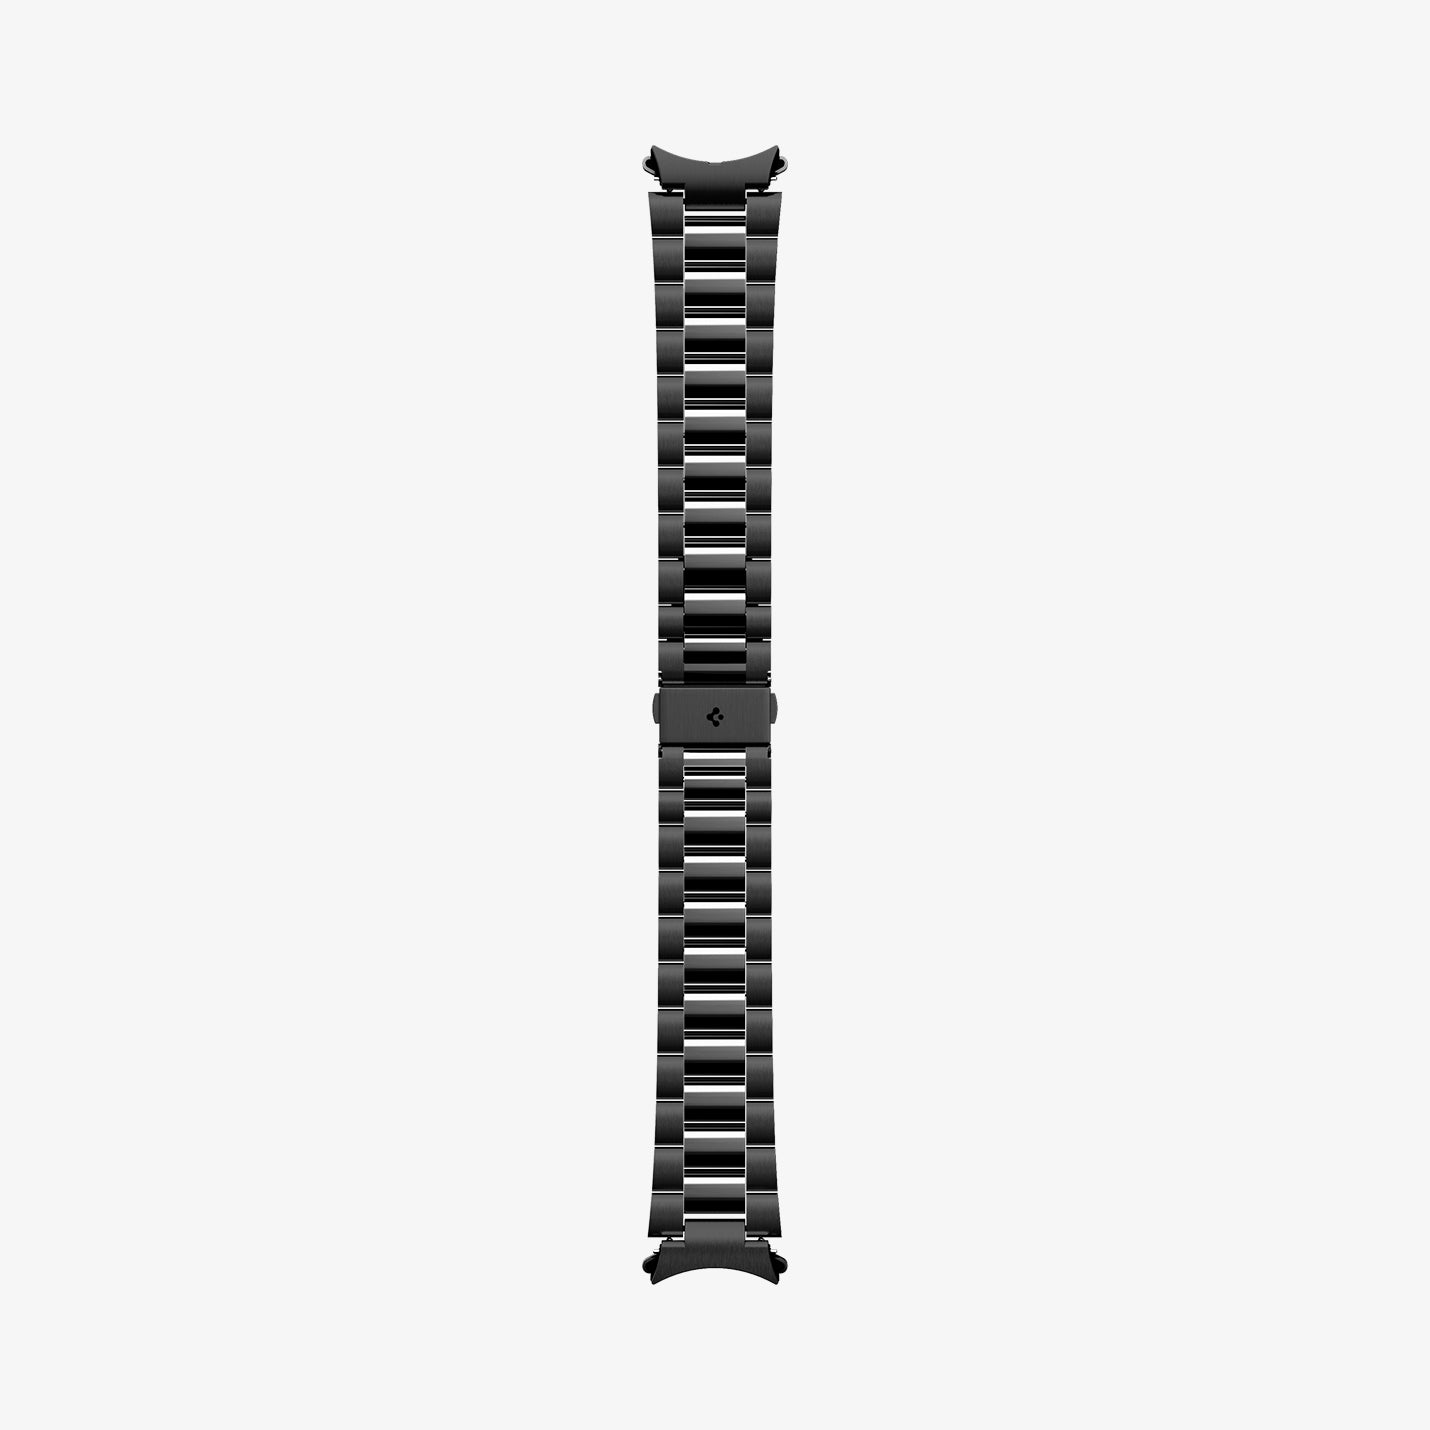 AMP06490 - Watch 6 Classic (47mm) Modern Fit 316L Band in Black showing the sides of the watch strap laid out flat